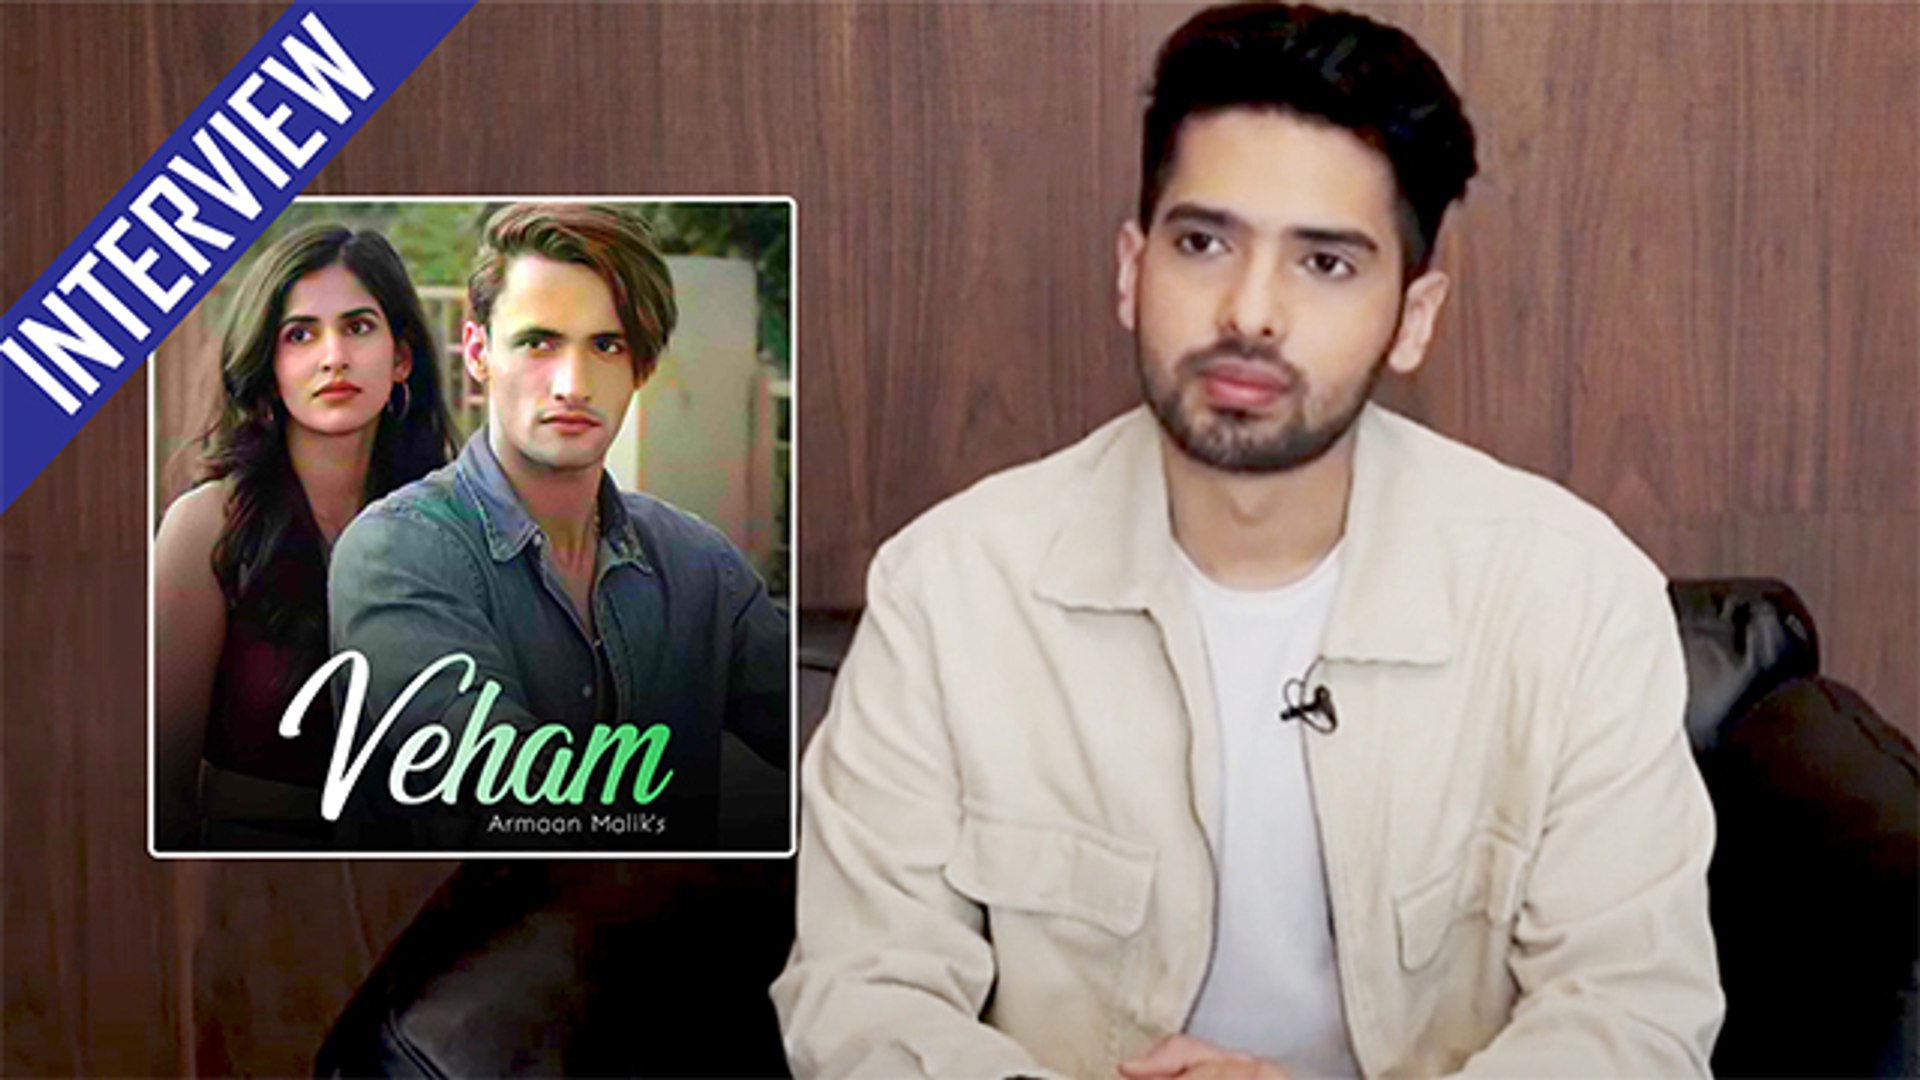 Armaan Malik's Interview On His Acting Plans And New Song Veham - video  Dailymotion